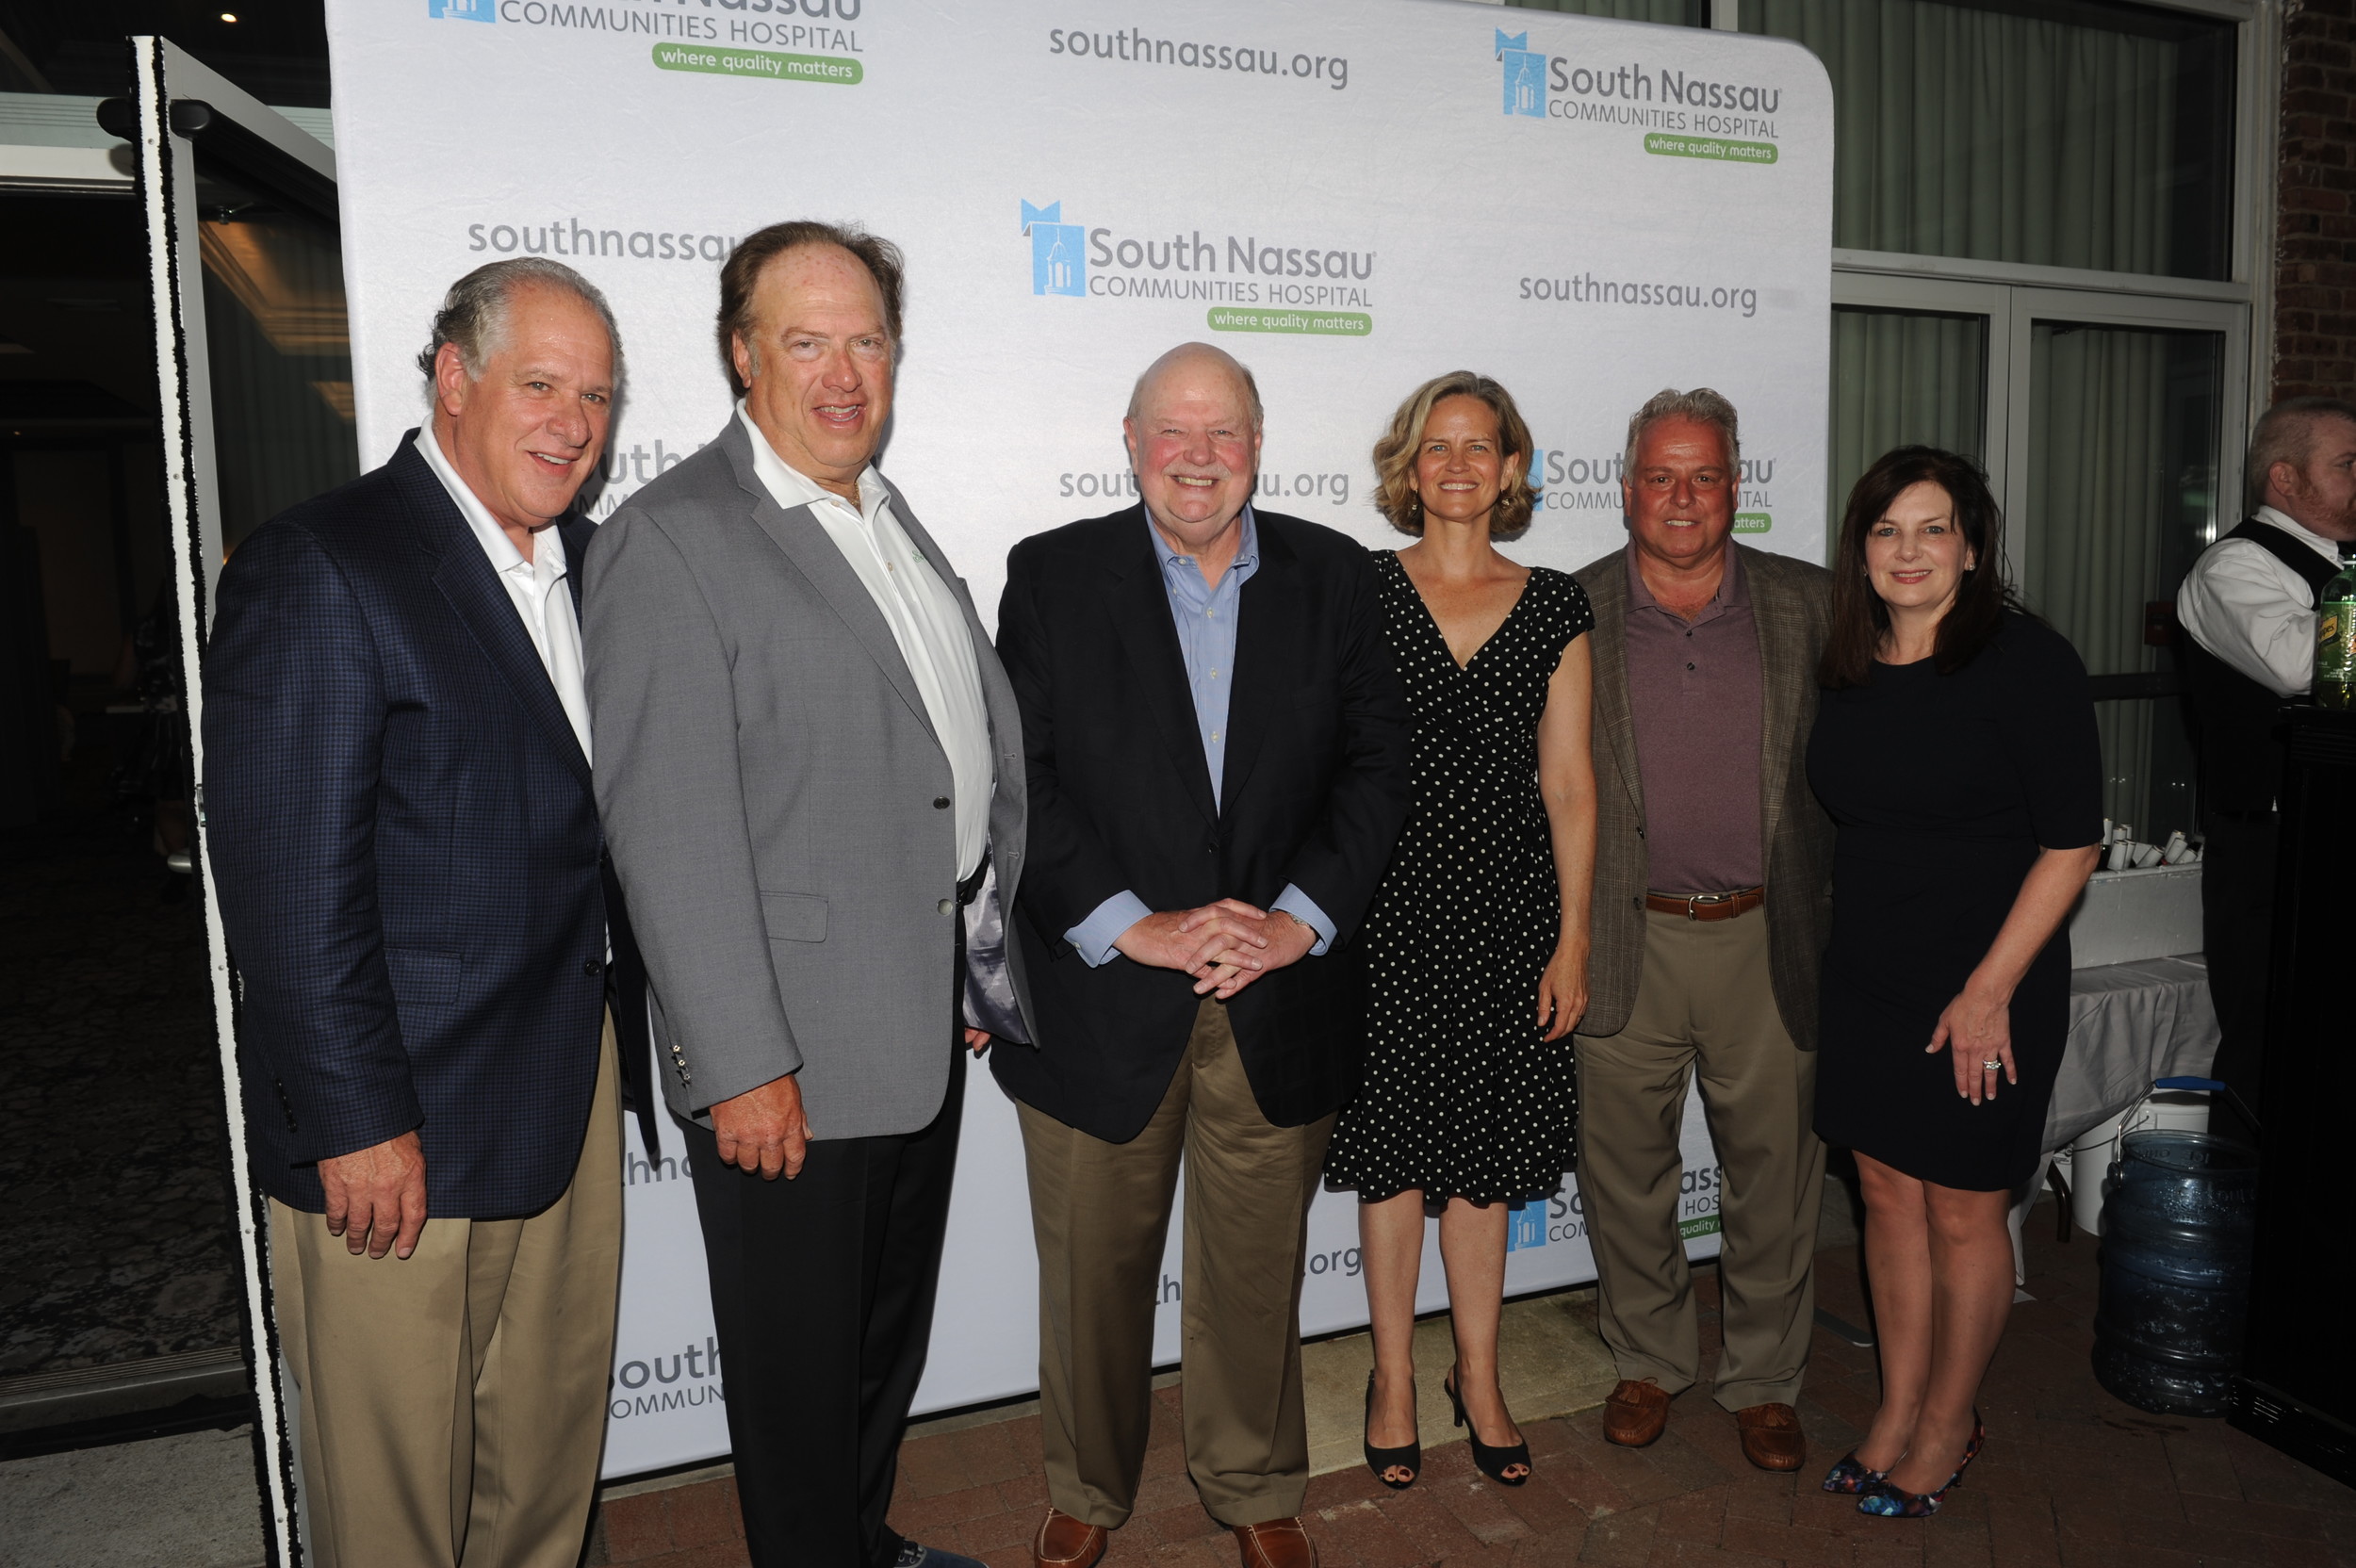 Golf Committee co-chairmen Tony Cancellieri and Jeff Greenfield, left, Chairman of the Board Joseph Fennessy, Legislator Laura Curran and Michael and Eileen Sapraicone.